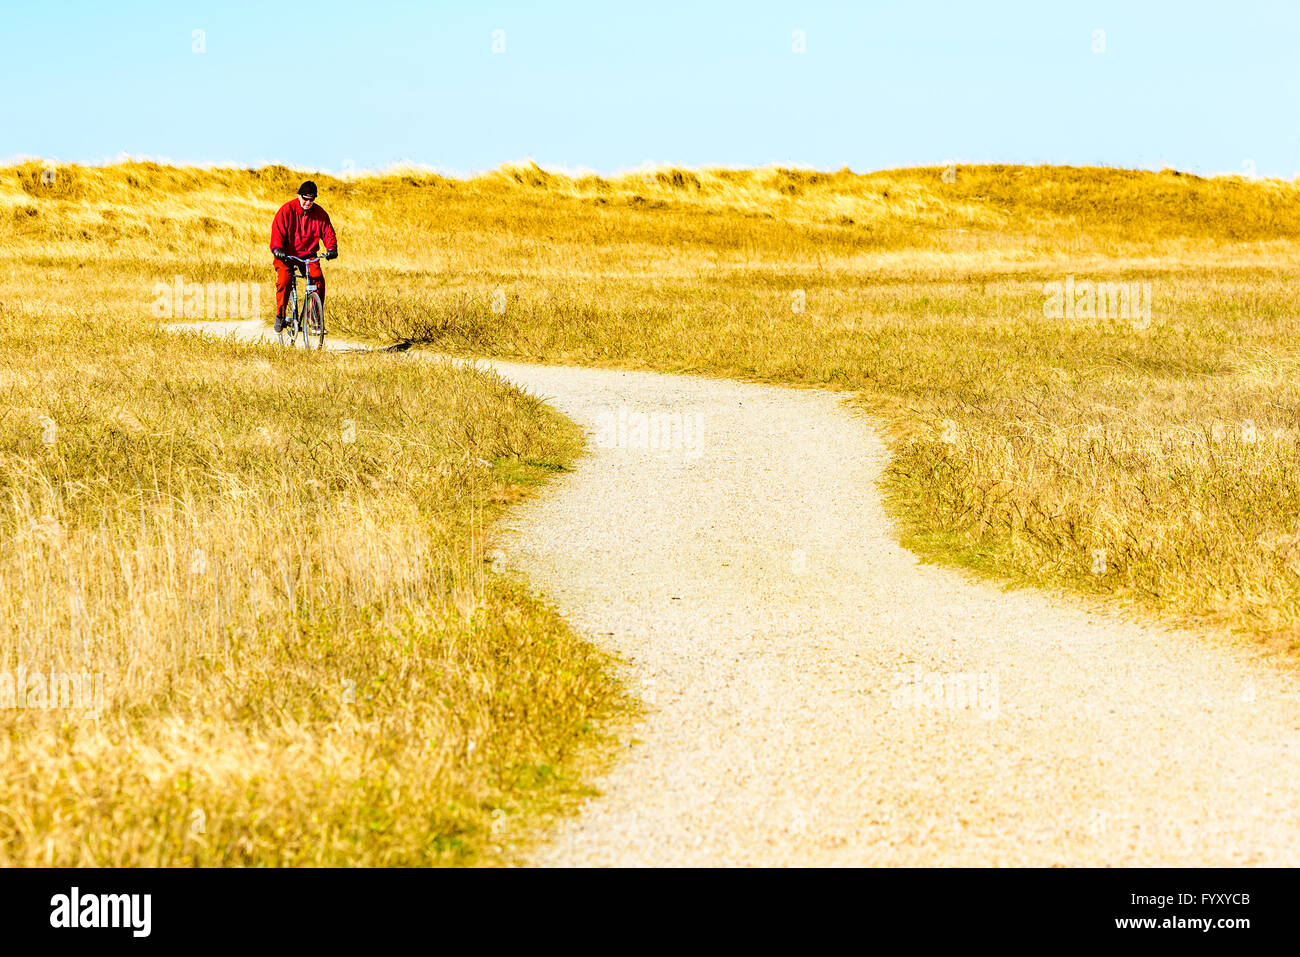 Falsterbo, Sweden - April 11, 2016: Male adult cycling at the hiking trail Skaneleden on a winding part at the coast with dry gr Stock Photo